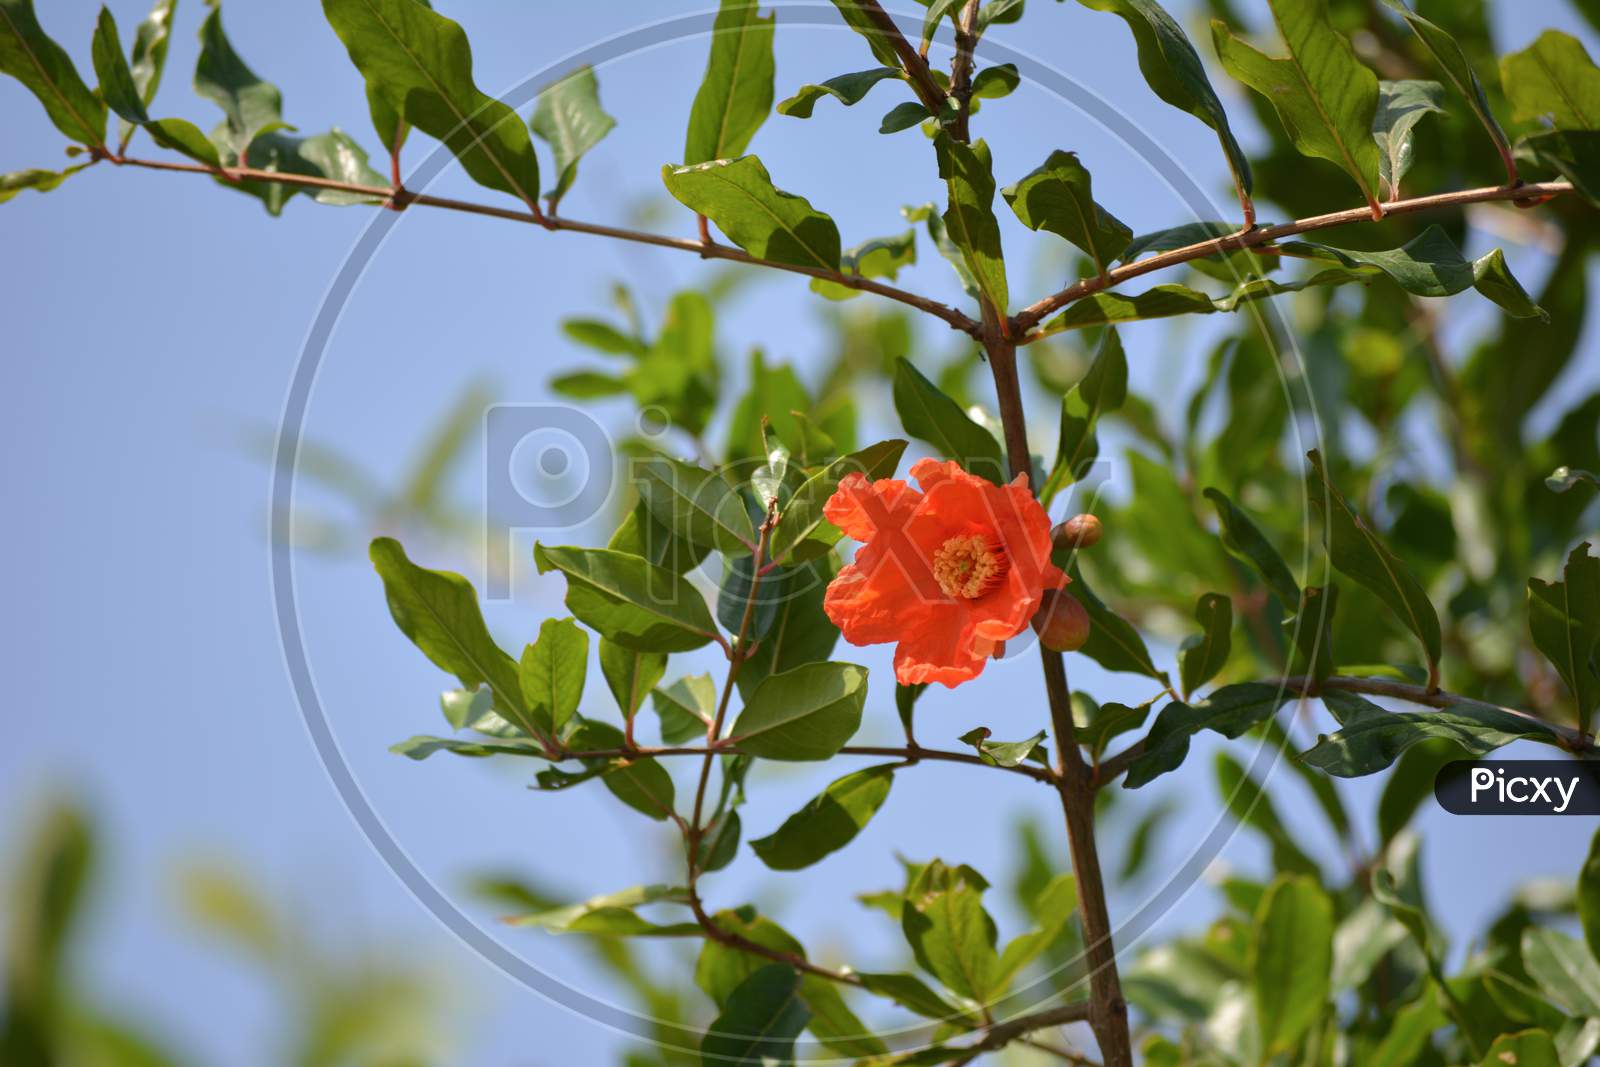 Pomegranate flowers and green leaves in nature